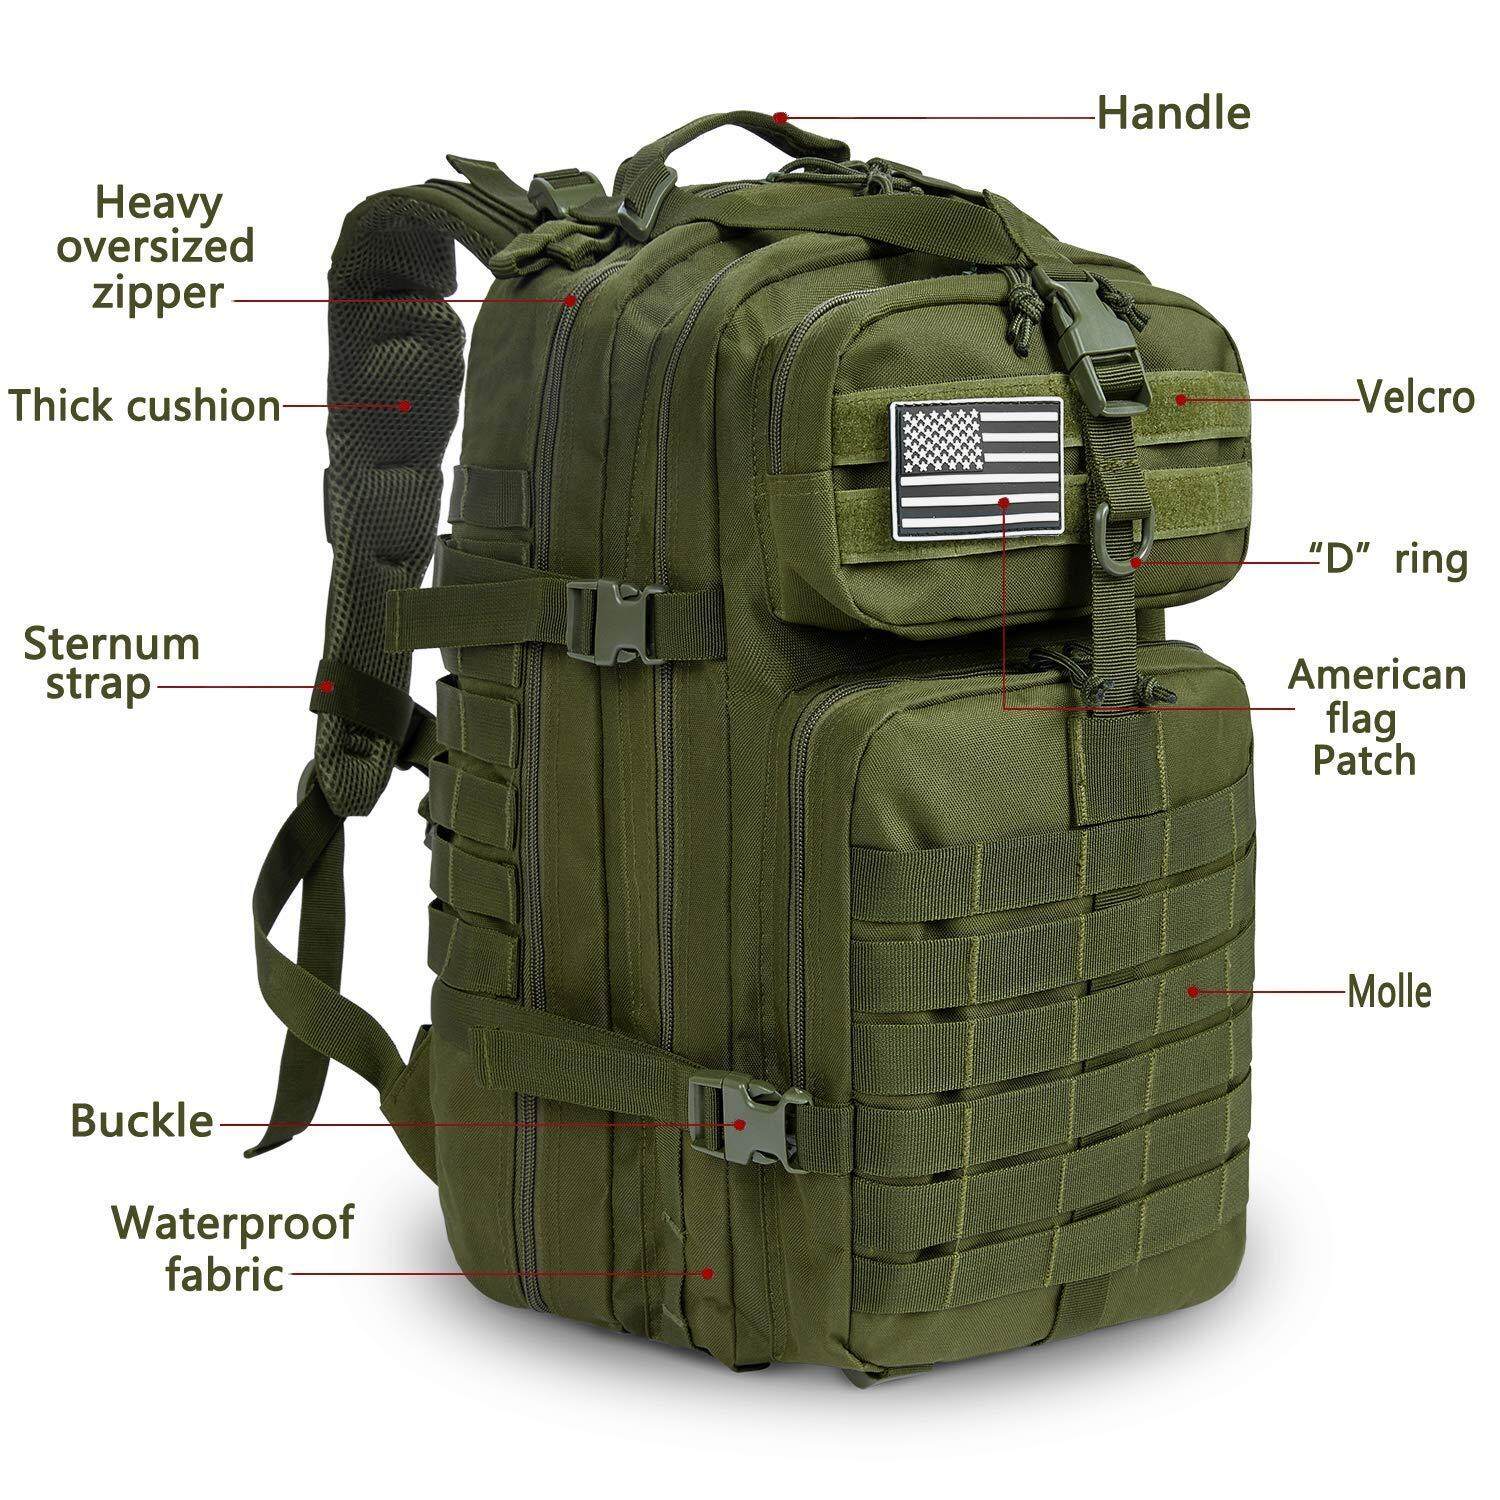 Army Military Day Pack Combat Bag Over Shoulder Travel Rucksack BTP Molle New